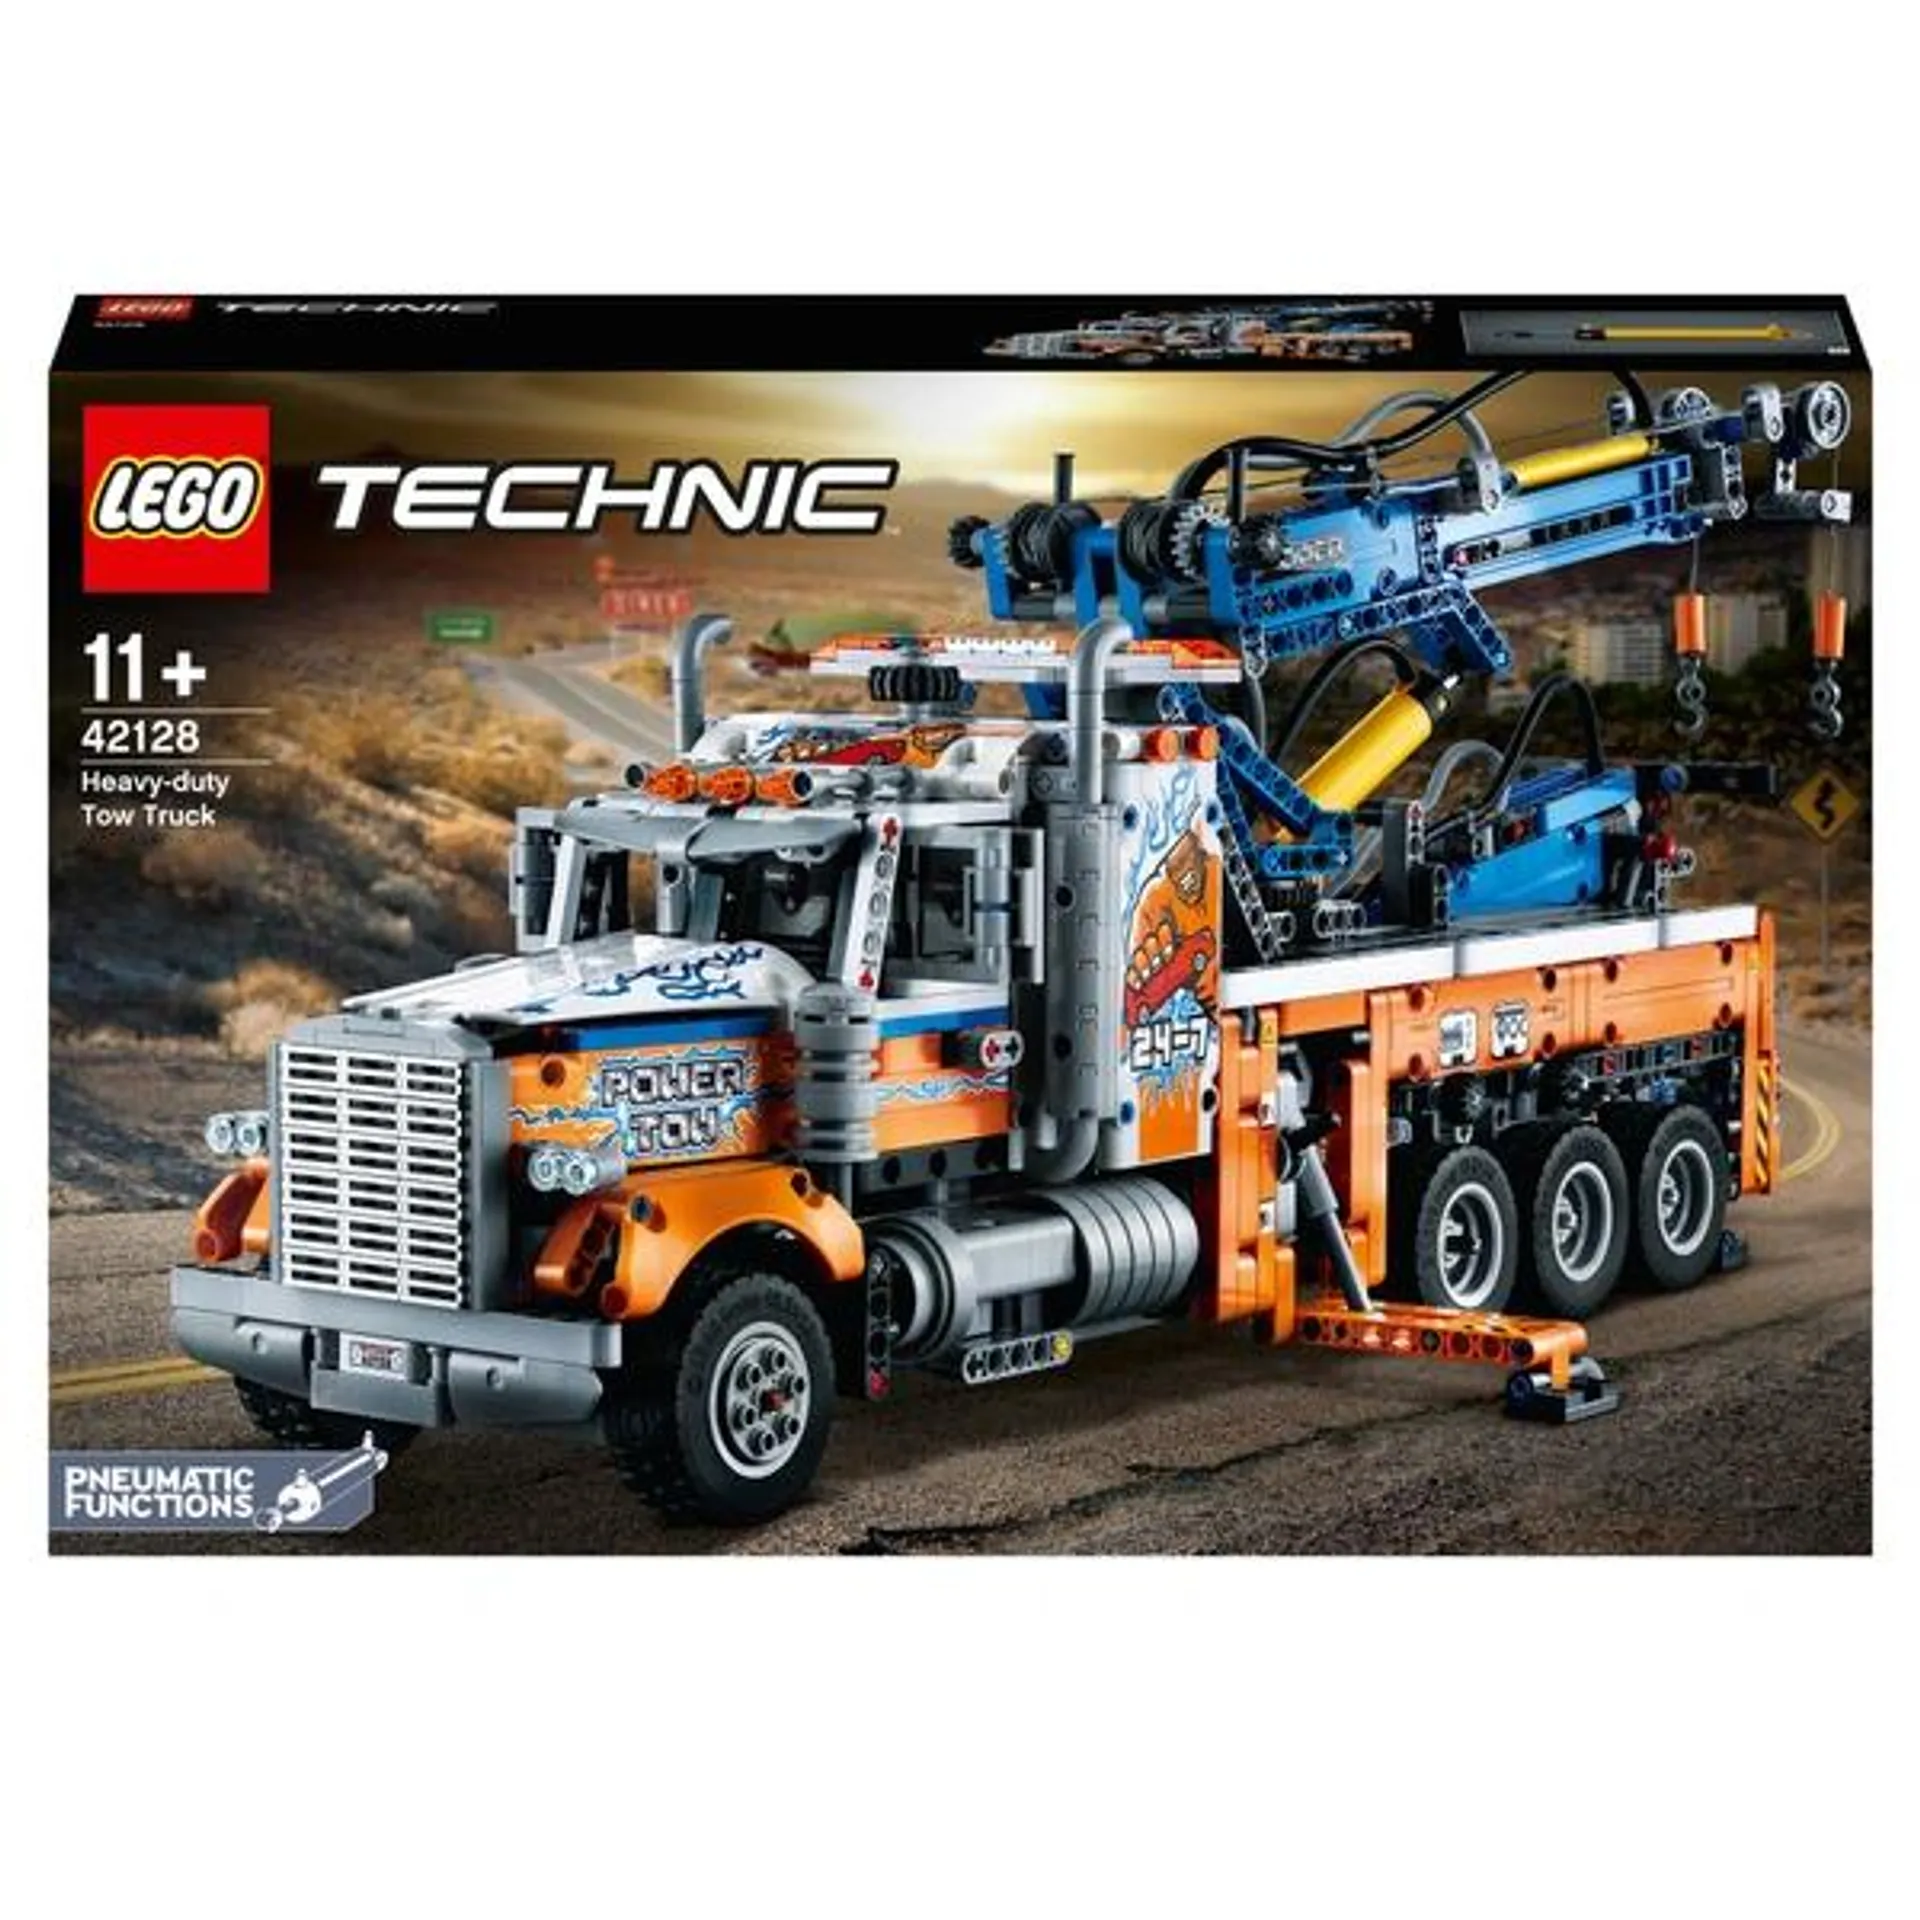 LEGO Technic 42128 Heavy-Duty Tow Truck Toy with Pneumatic Crane